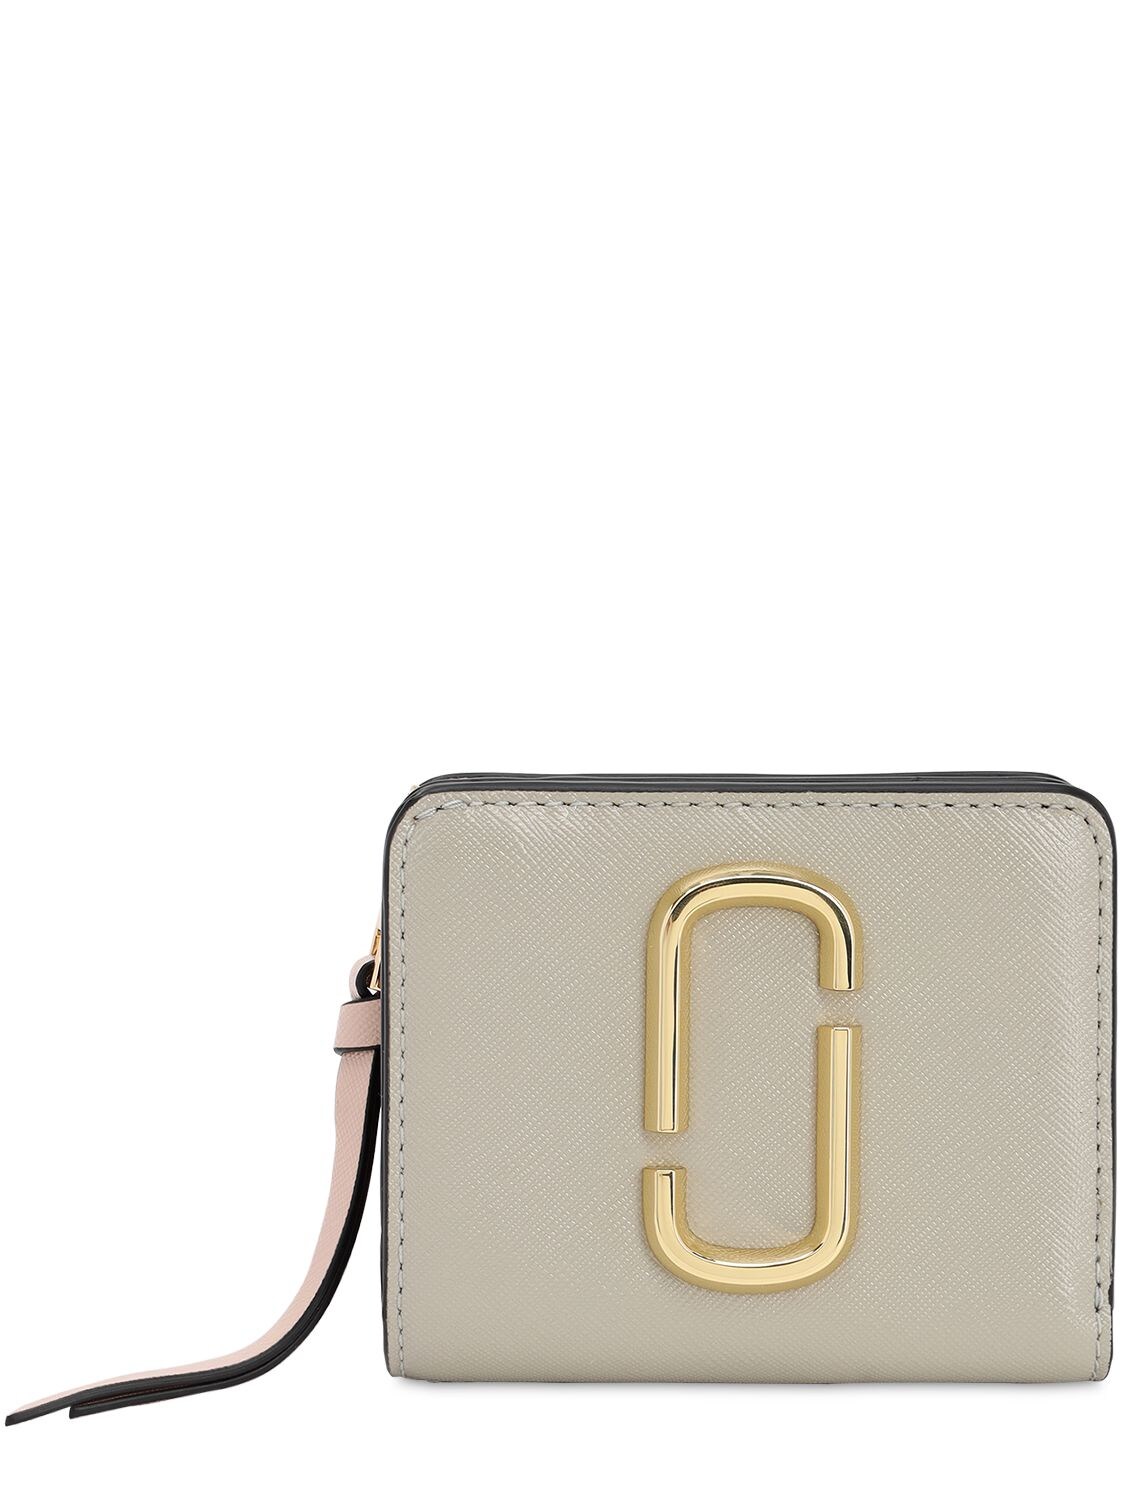 Marc Jacobs Compact Grained Leather Wallet In Beige